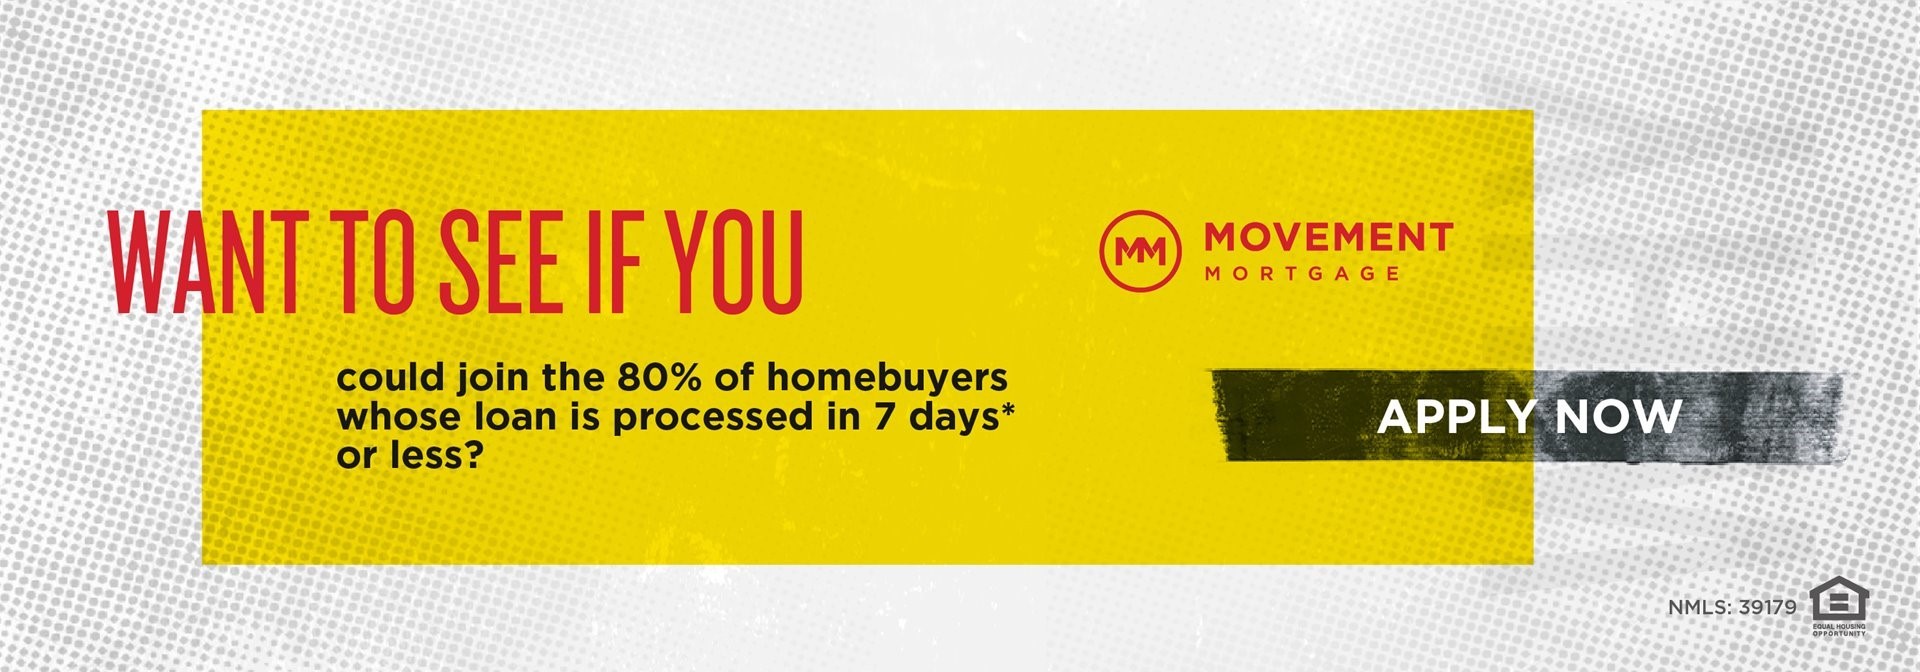 Want to see if you could join the 80% of homebuyers whose loan is processed in 7 days or less? Apply now